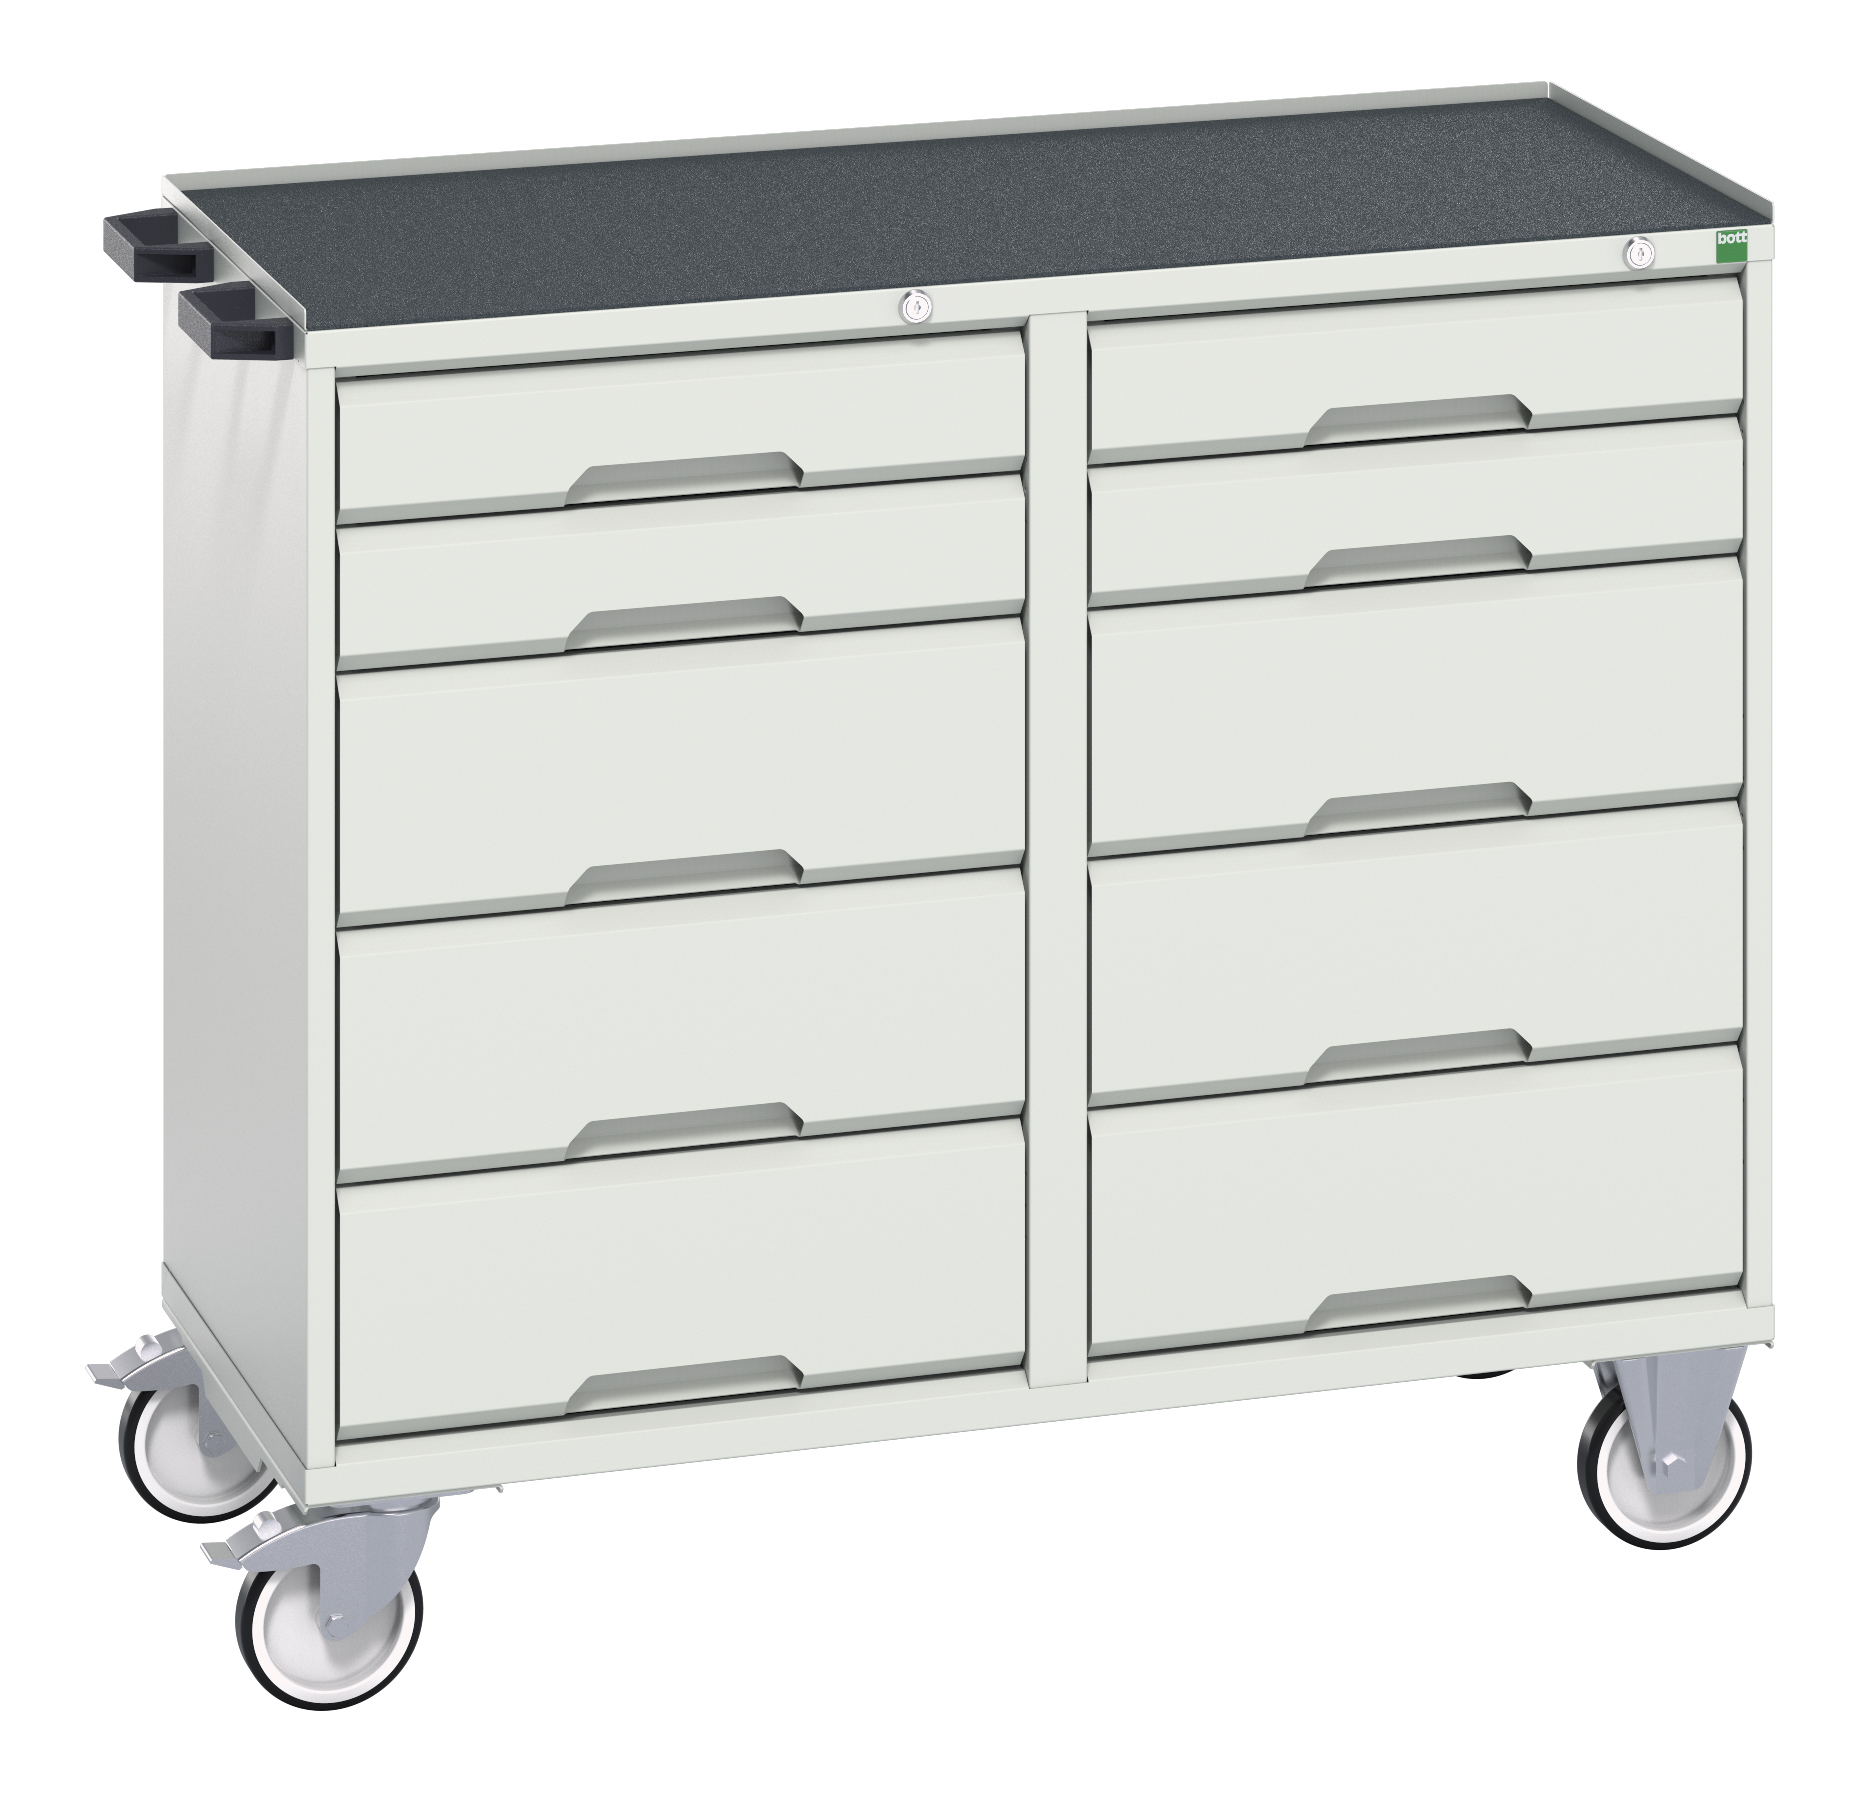 Bott Verso Maintenance Trolley With 10 Drawers & Top Tray With Mat - 16927102.16